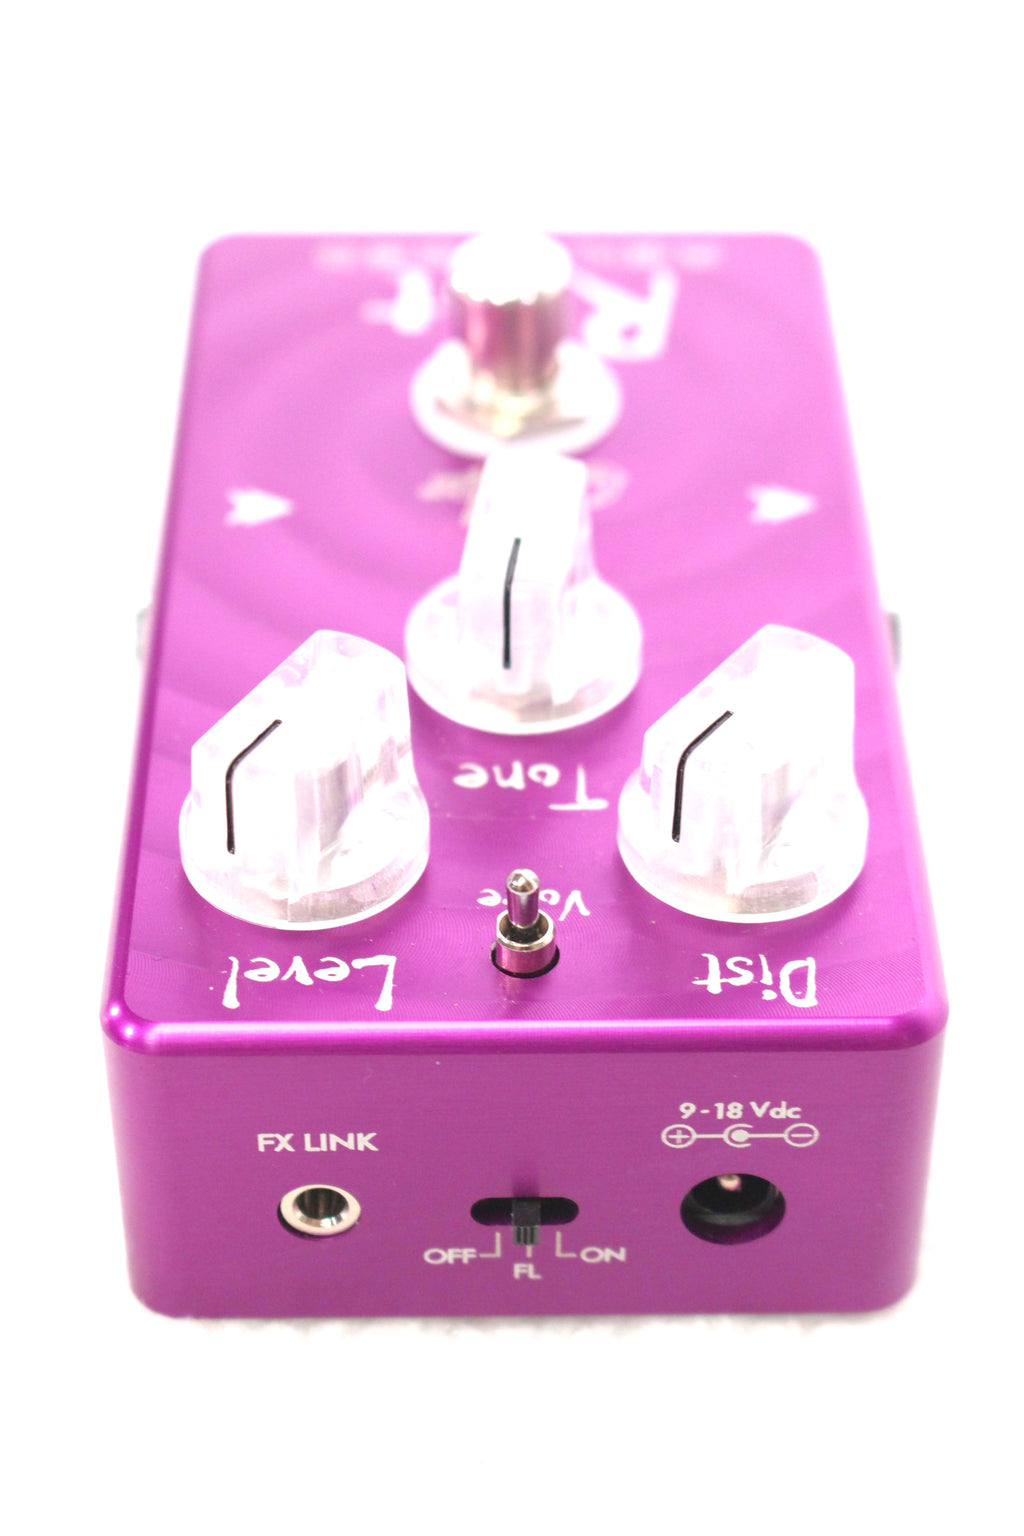 Suhr Riot Reloaded Distortion Pedal – Strings & Things Music LLC